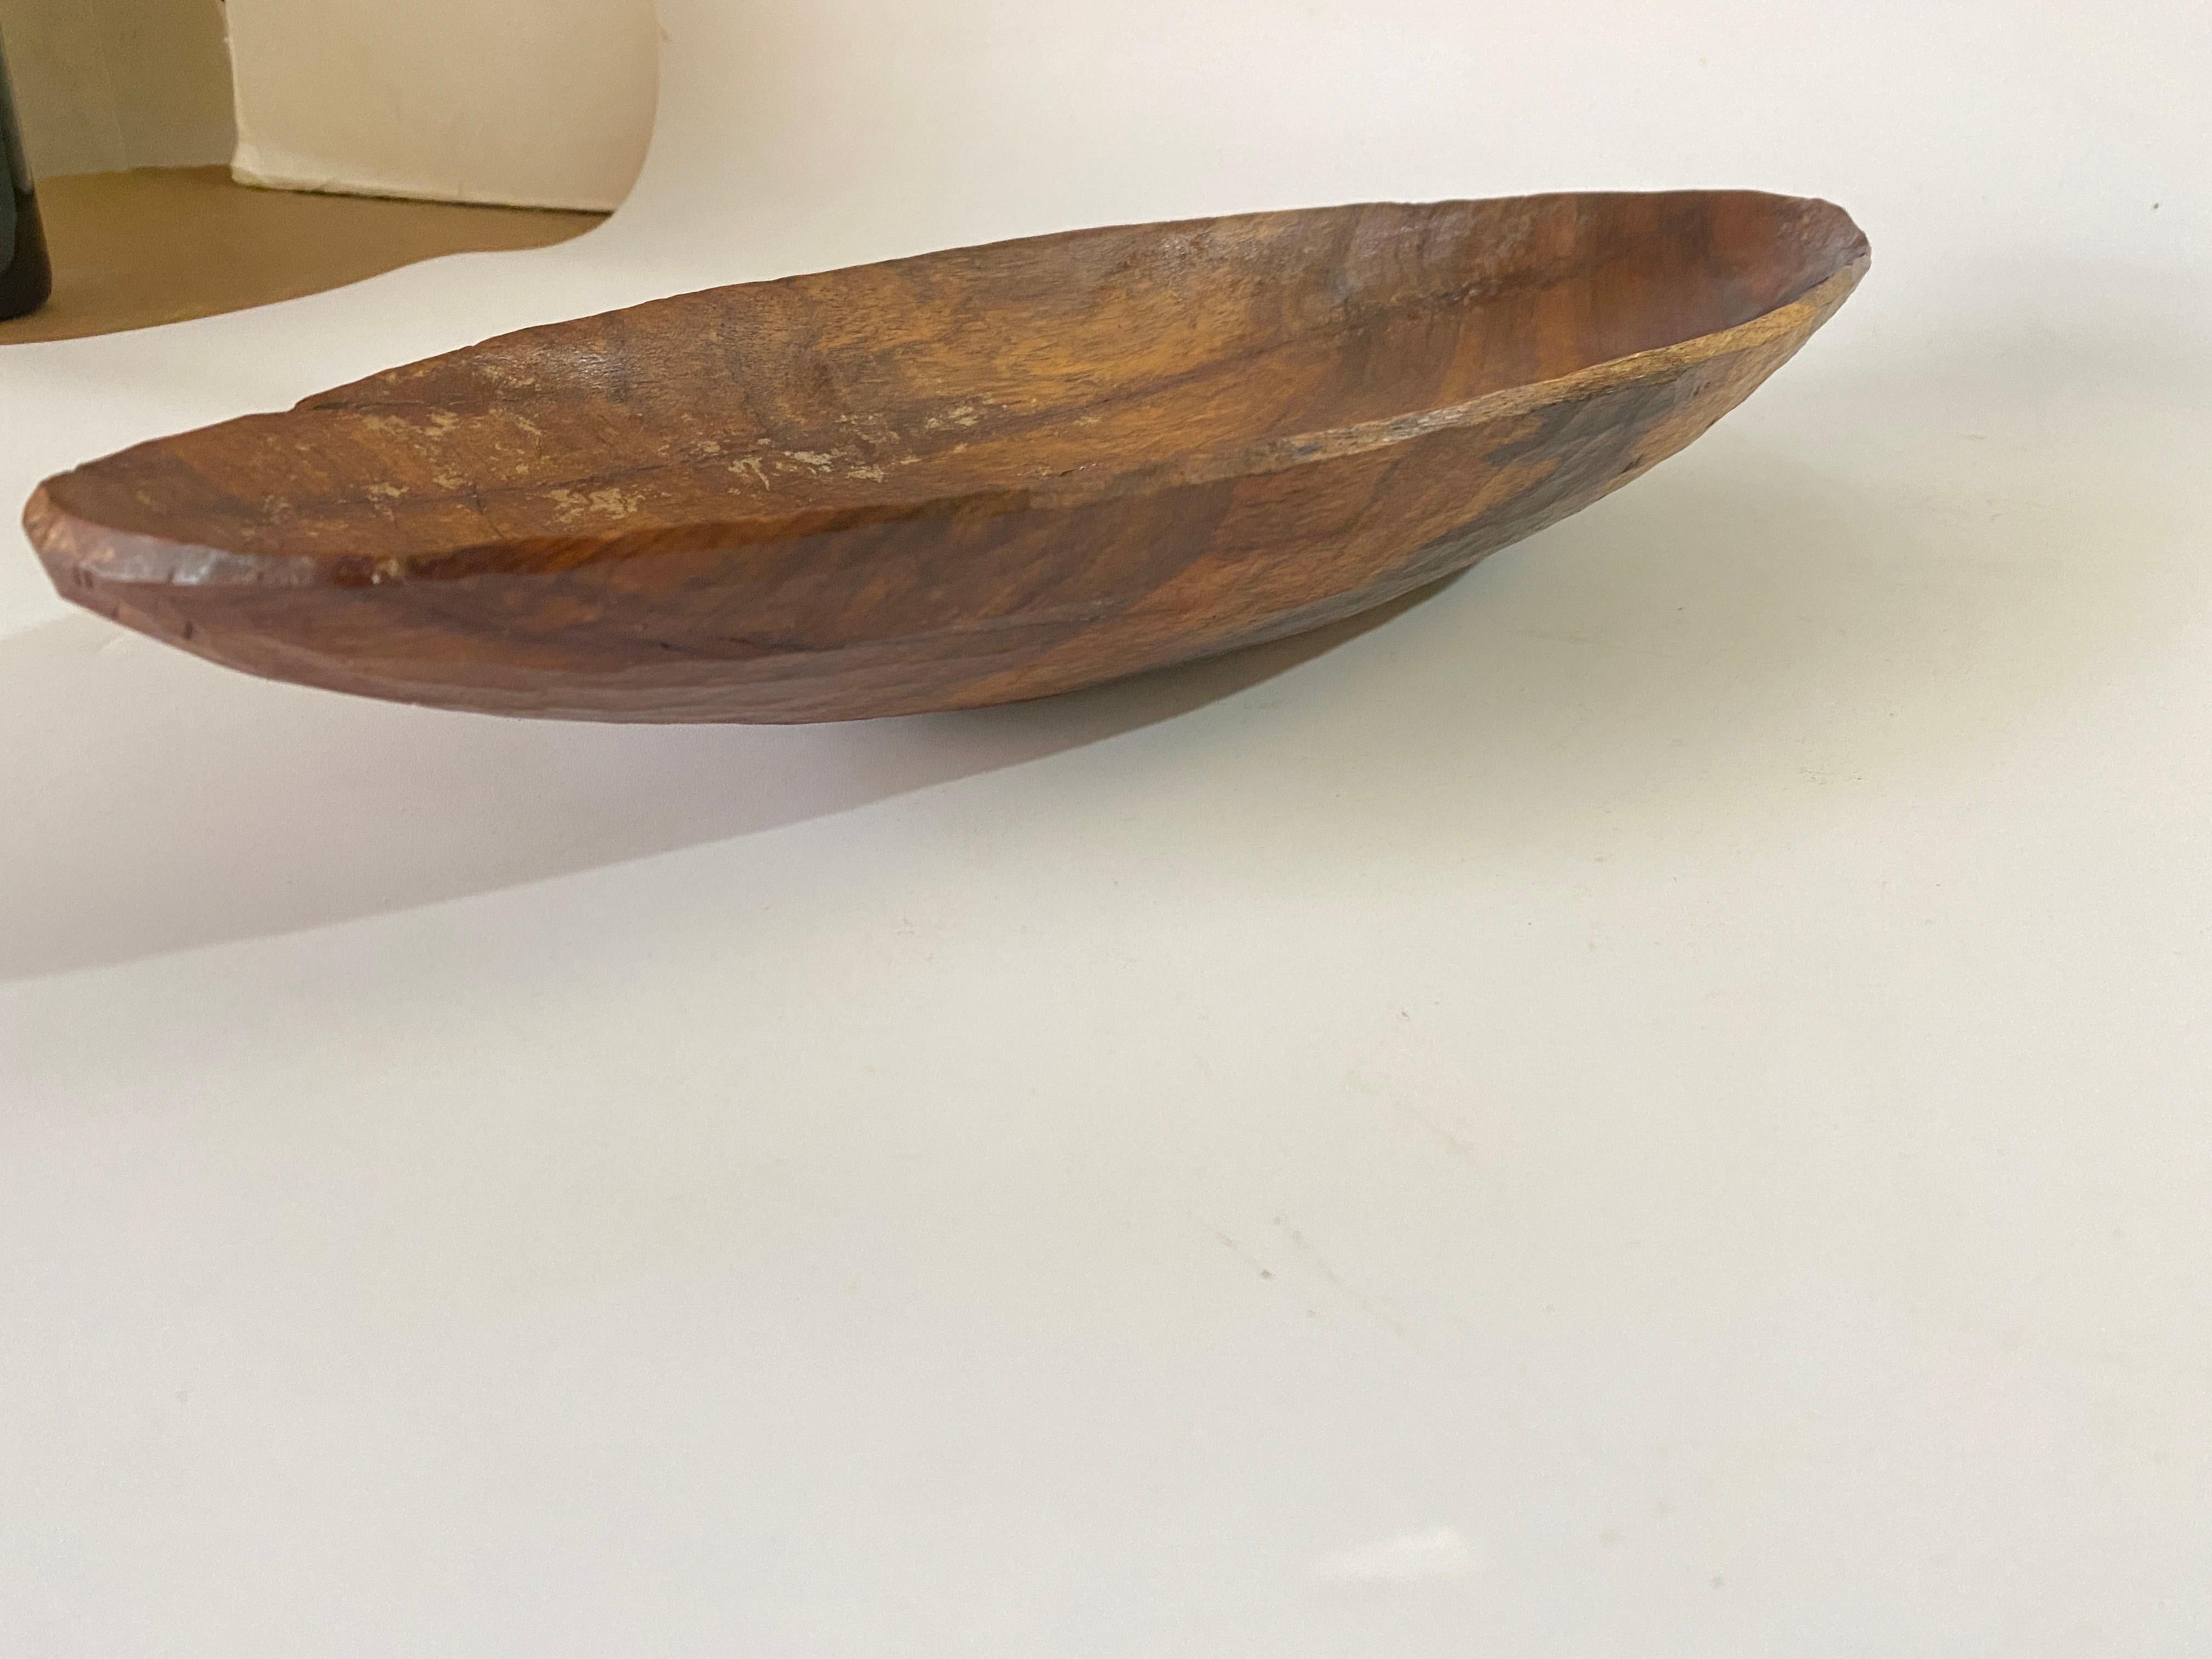 Brutalist Wood Bowl, Large, in a Brown Patina, France, circa 1960 For Sale 1